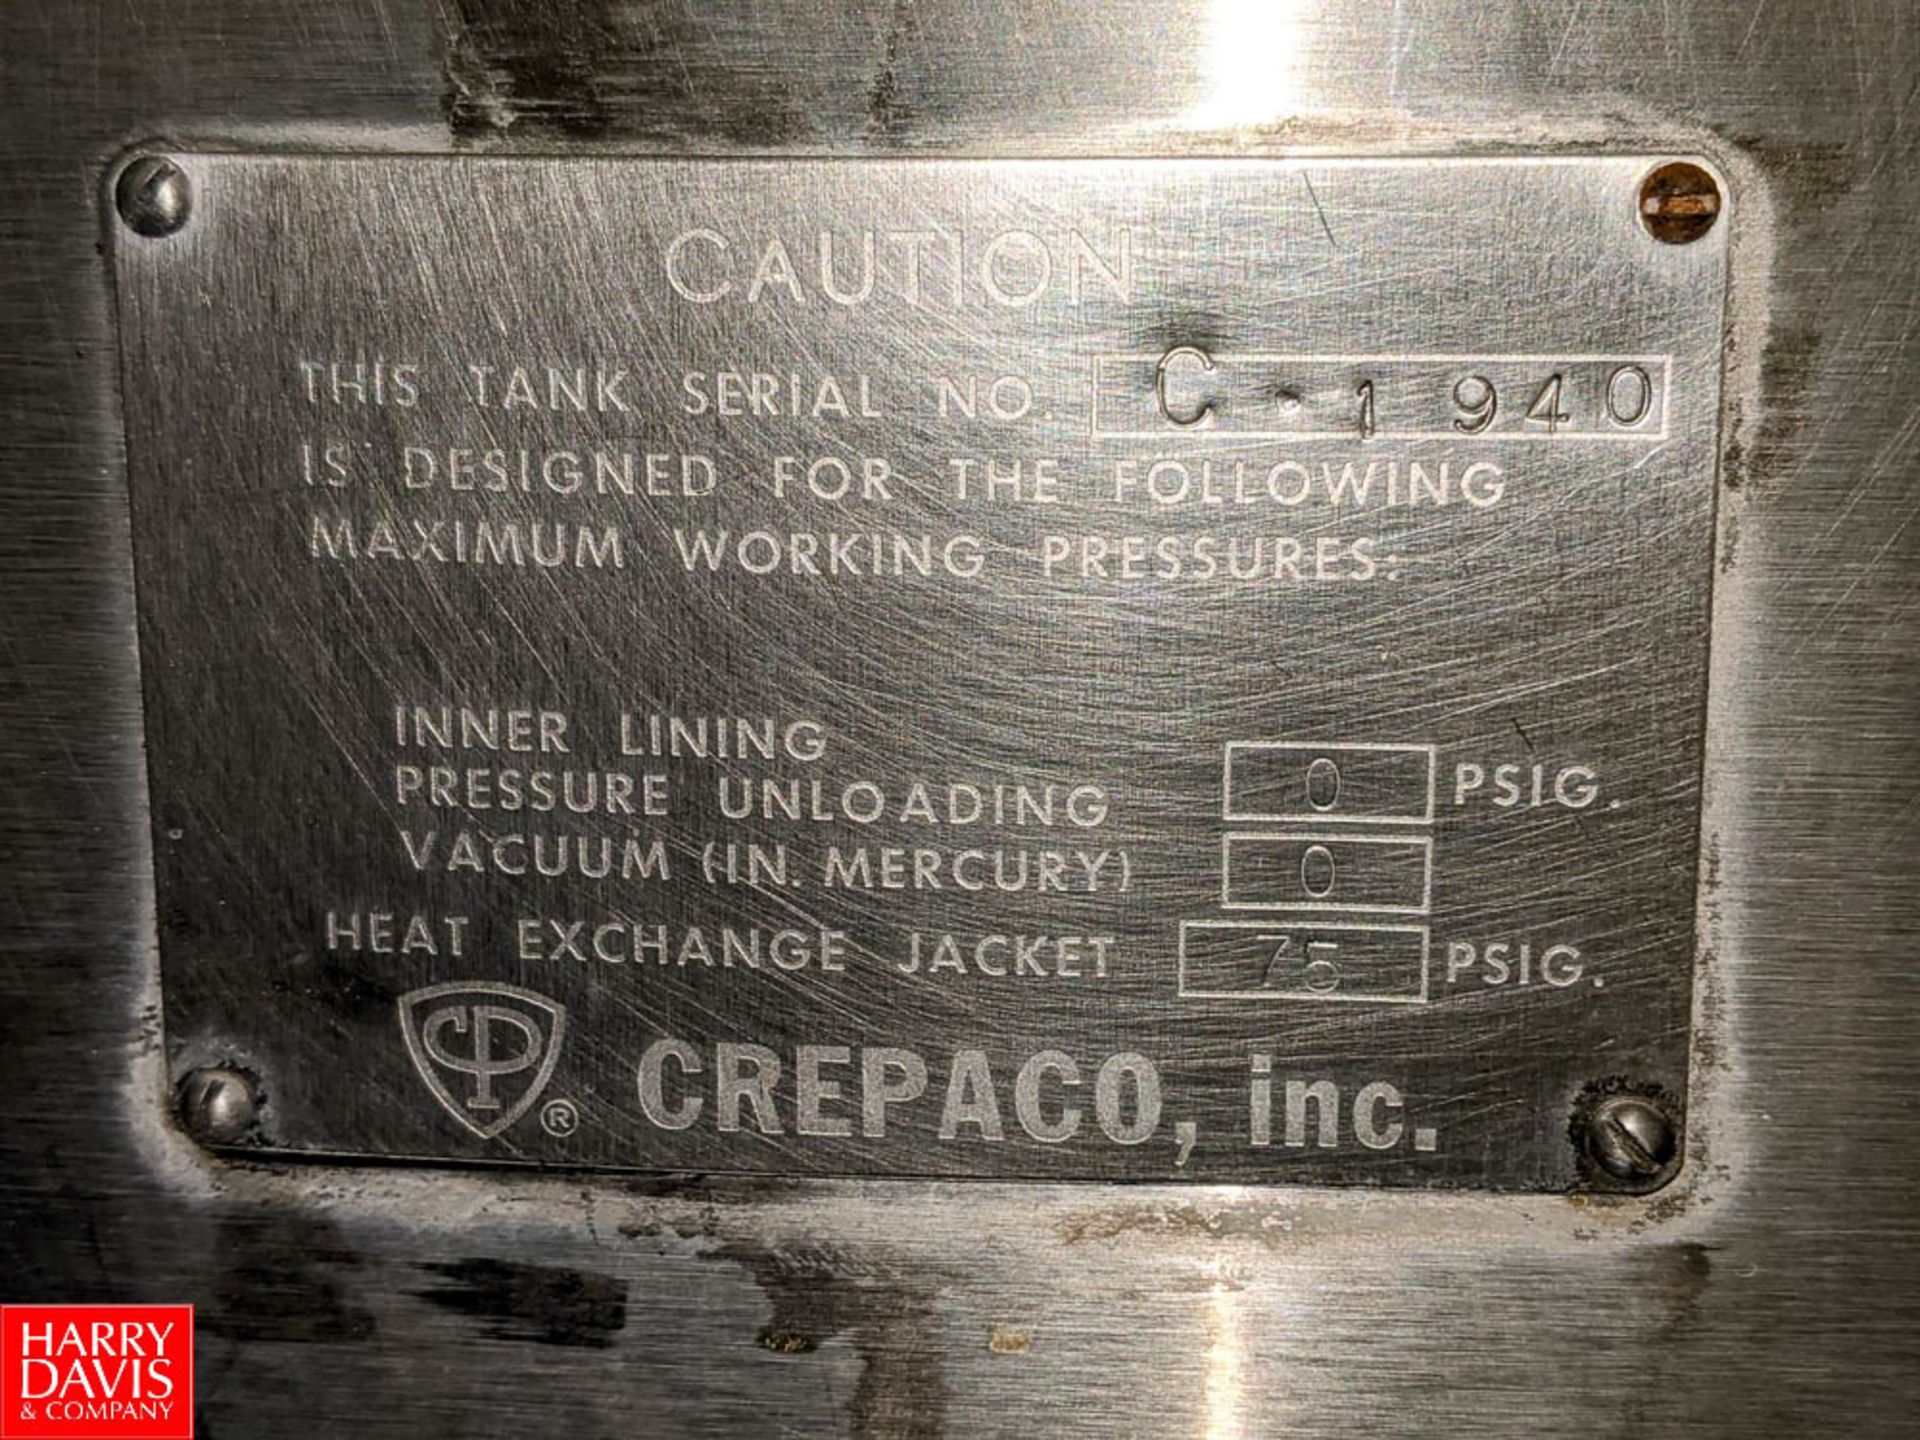 Crepaco 600 Gallon S/S Jacketed Processor Tank with Vertical Agitation SN: C-1940 Tank V3, (Loc. - Image 5 of 5